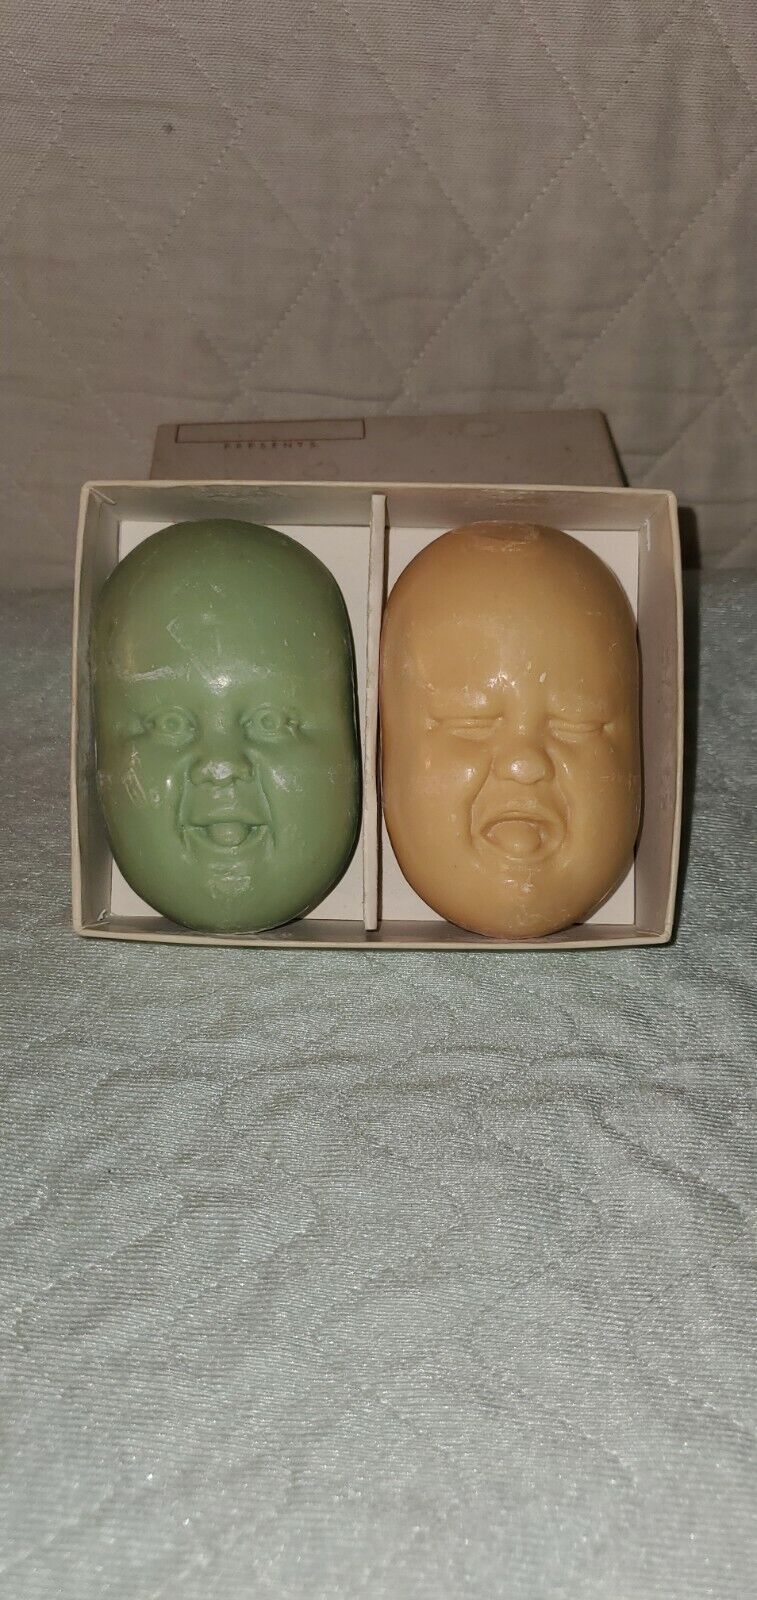 (RARE) The Clean-up Twins Novelty Soap rare  Open Box Unused From The 40’s